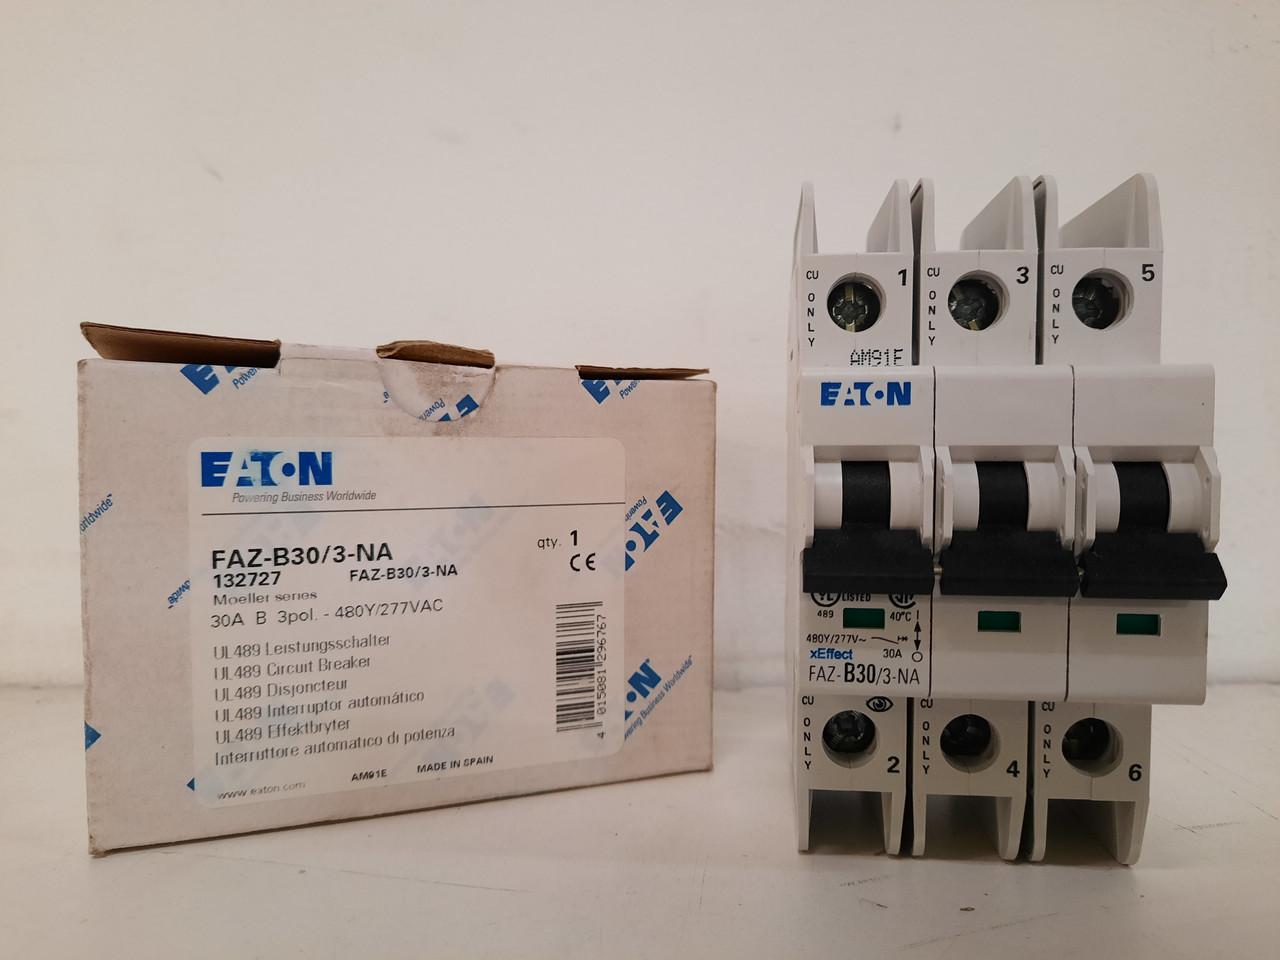 Eaton FAZ-B30/3-NA 277/480 VAC 50/60 Hz, 30 A, 3-Pole, 10/14 kA, 3 to 5 x Rated Current, Screw Terminal, DIN Rail Mount, Standard Packaging, B-Curve, Current Limiting, Thermal Magnetic